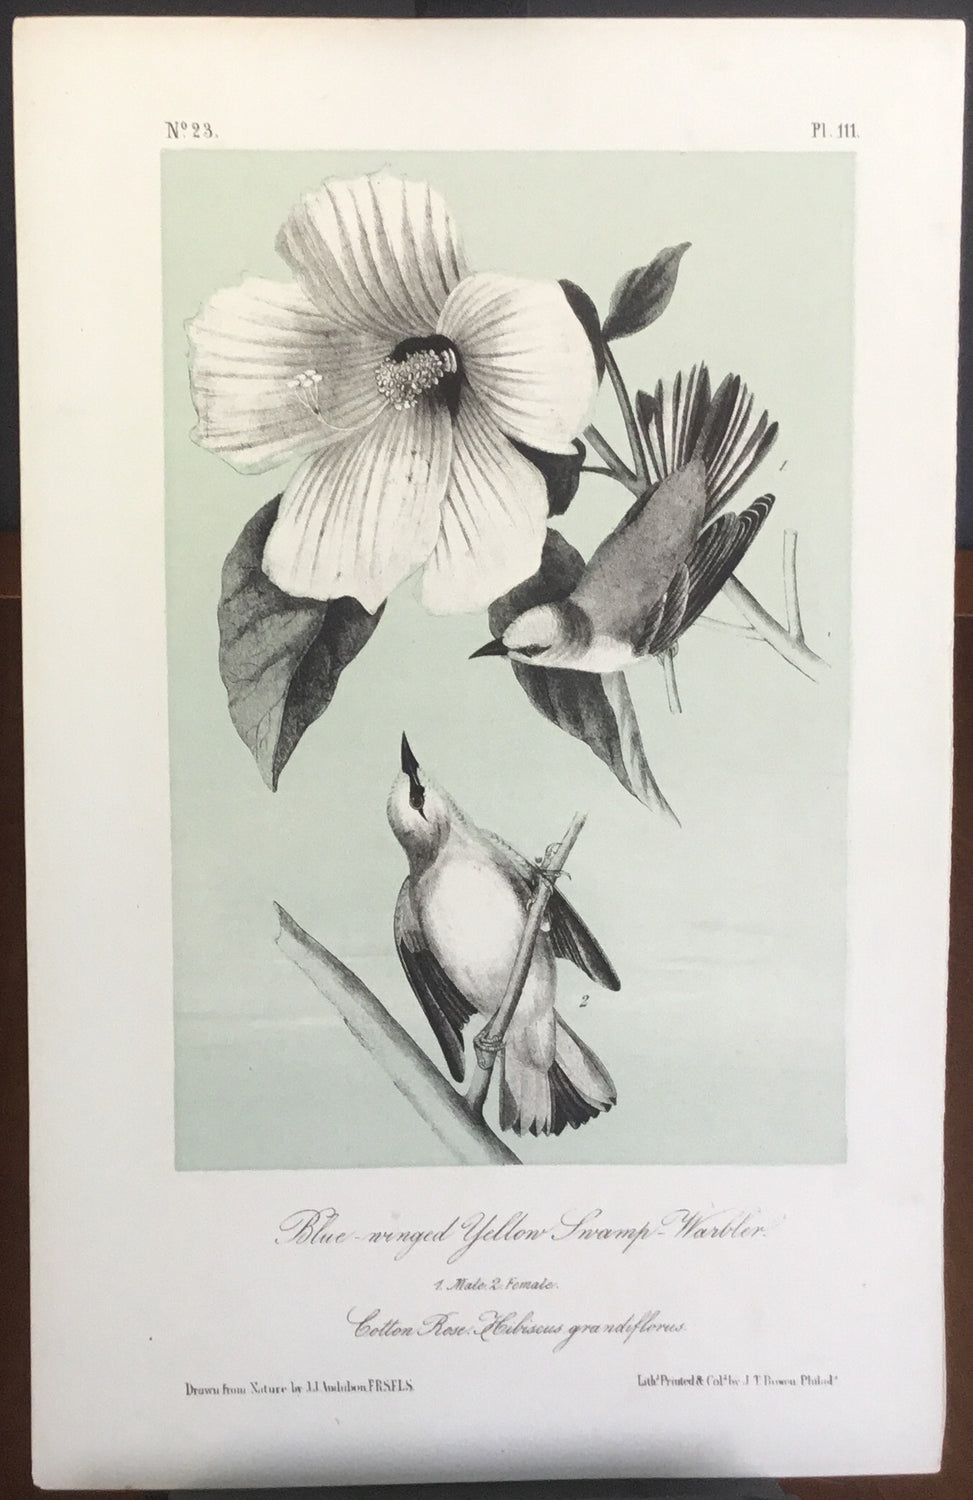 Audubon Octavo Blue-winged Yellow Swamp Warbler, plate 111, uncolored test sheet, 7 x 11